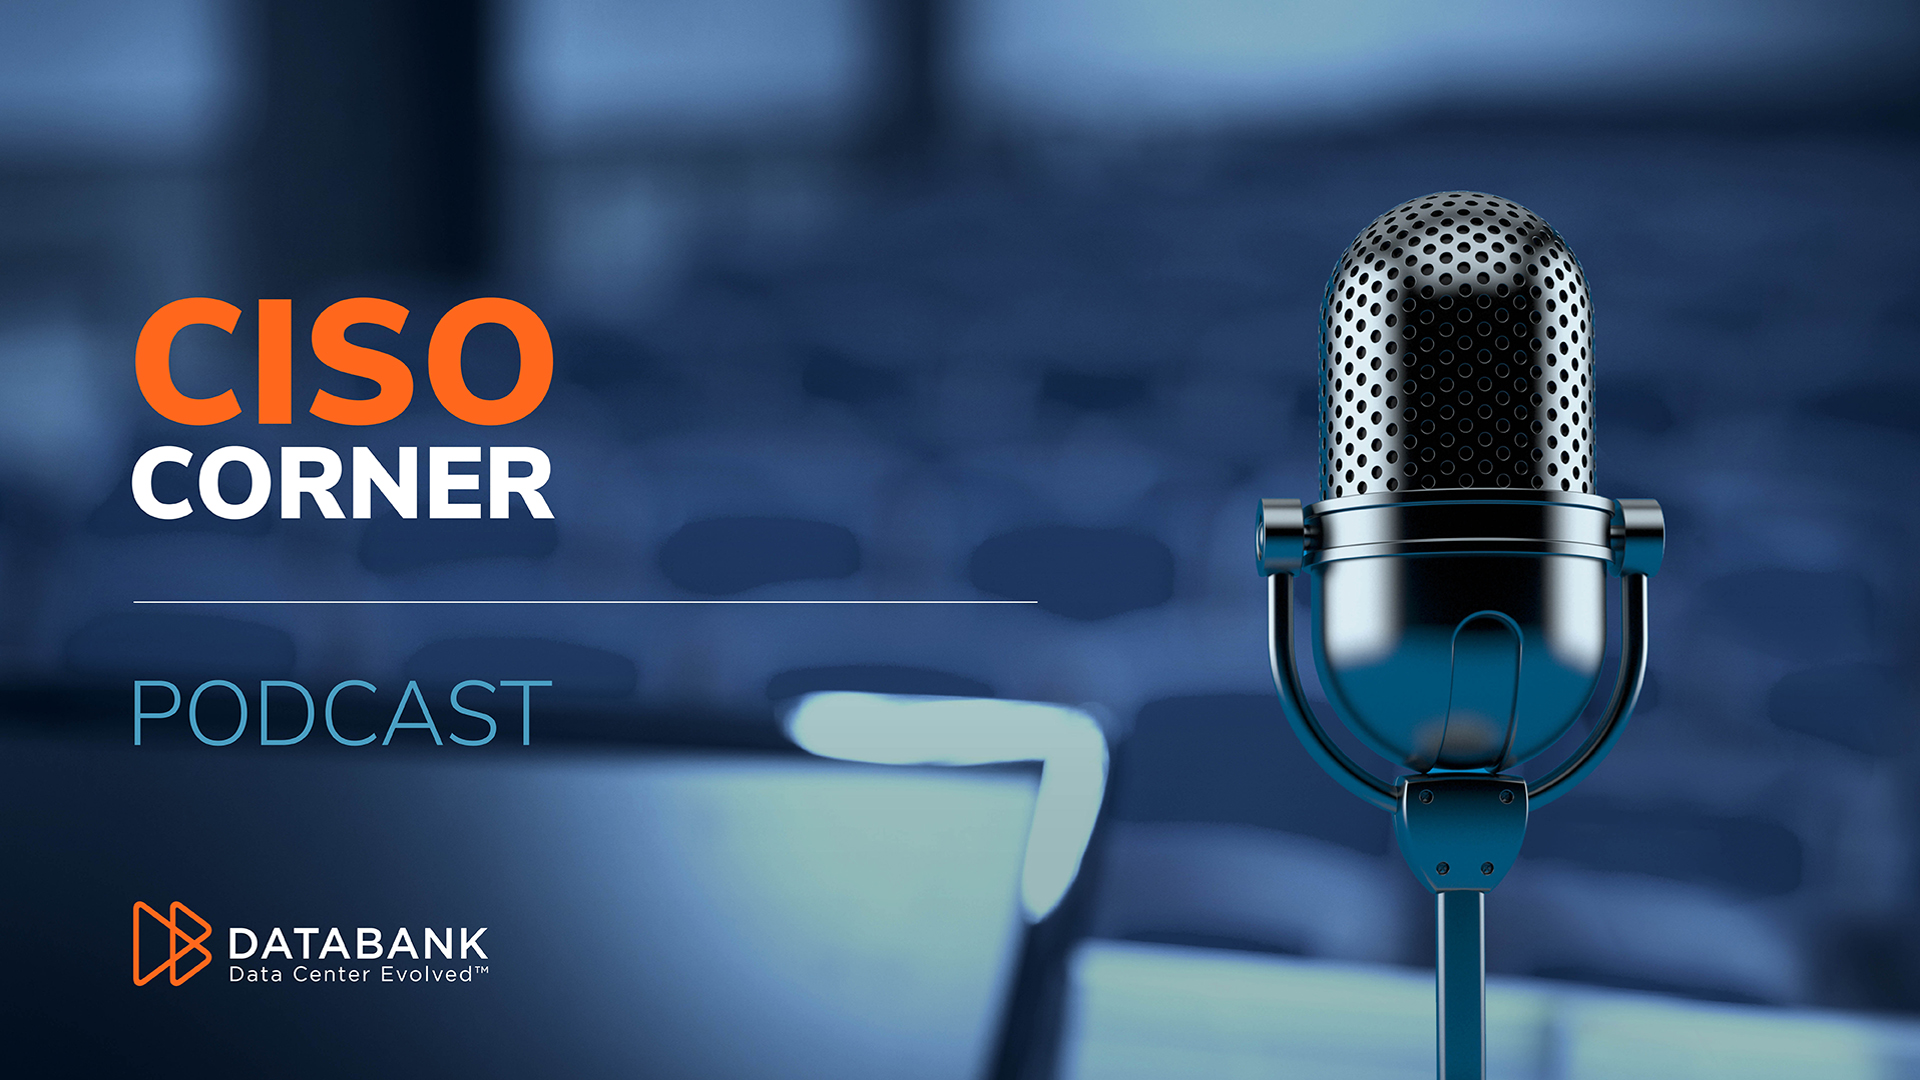 CISO Corner – Episode 1: Ransomware, California Consumer Privacy Act, and Nation-State Sponsored Attacks